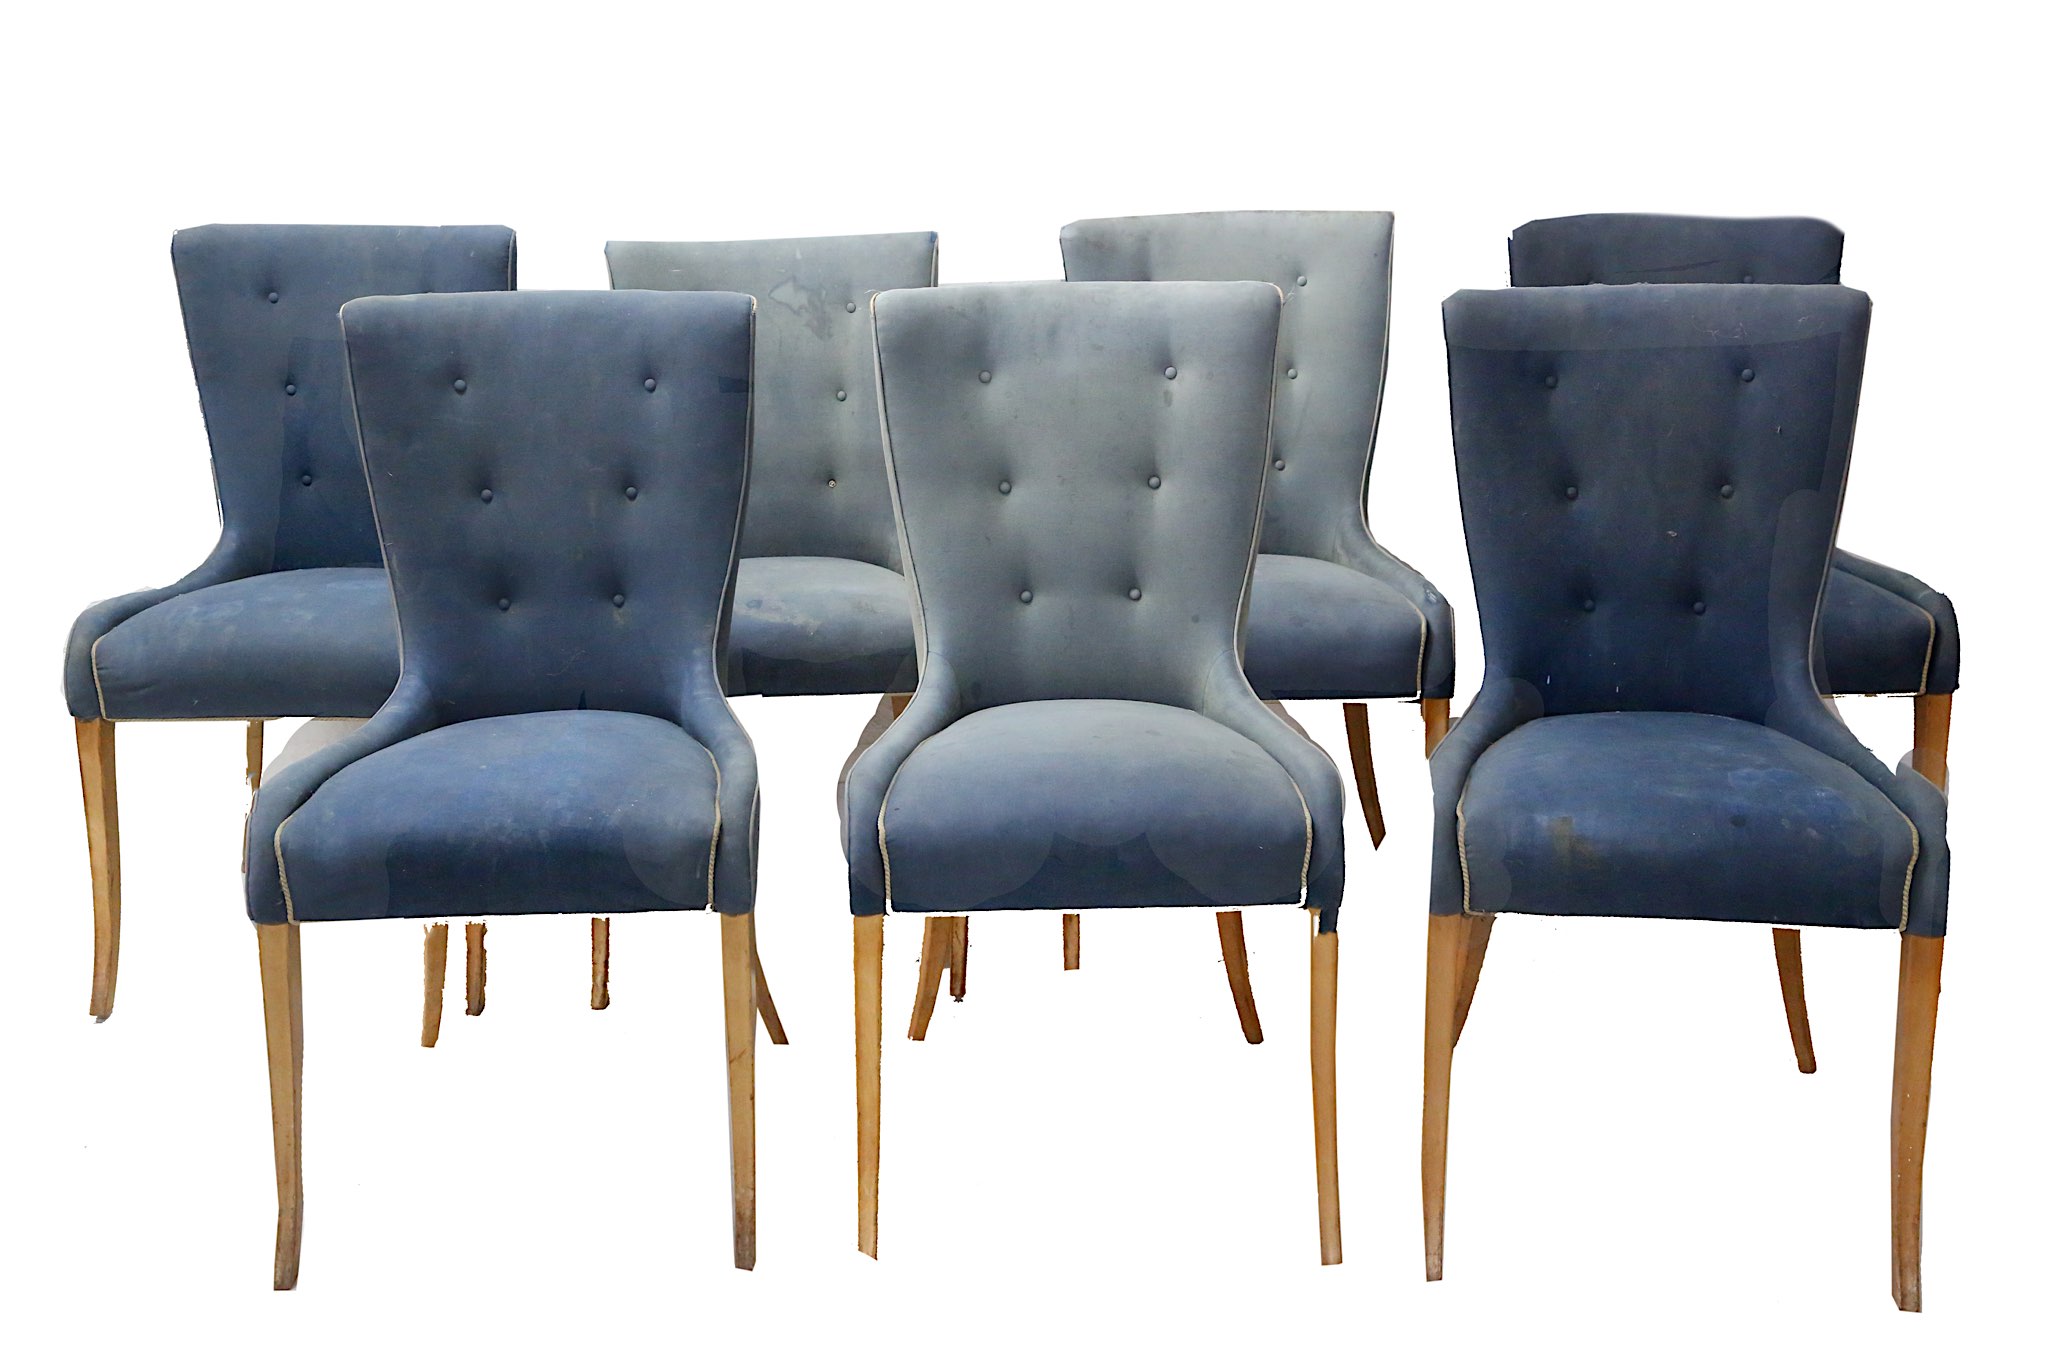 A set of seven dining chairs, mid-20th century, upholstered in buttoned pale blue velvet, on maple